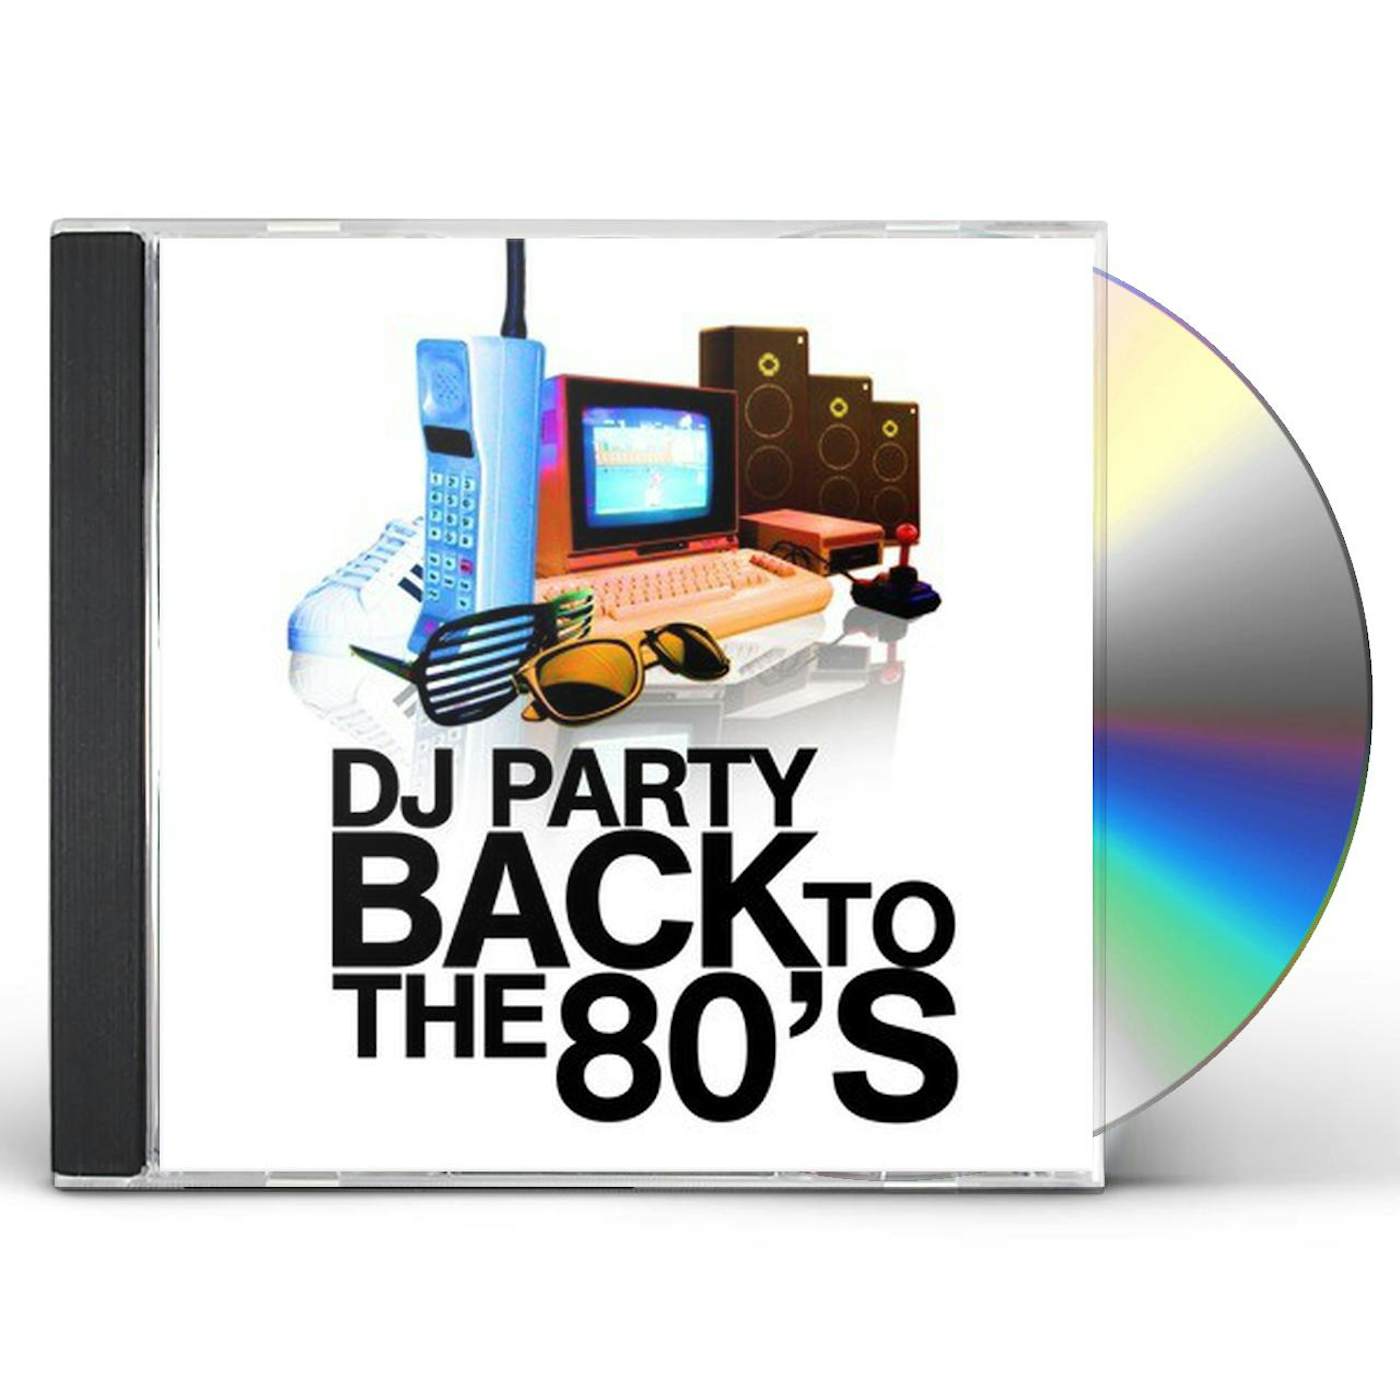 DJ Party BACK TO THE 80'S CD